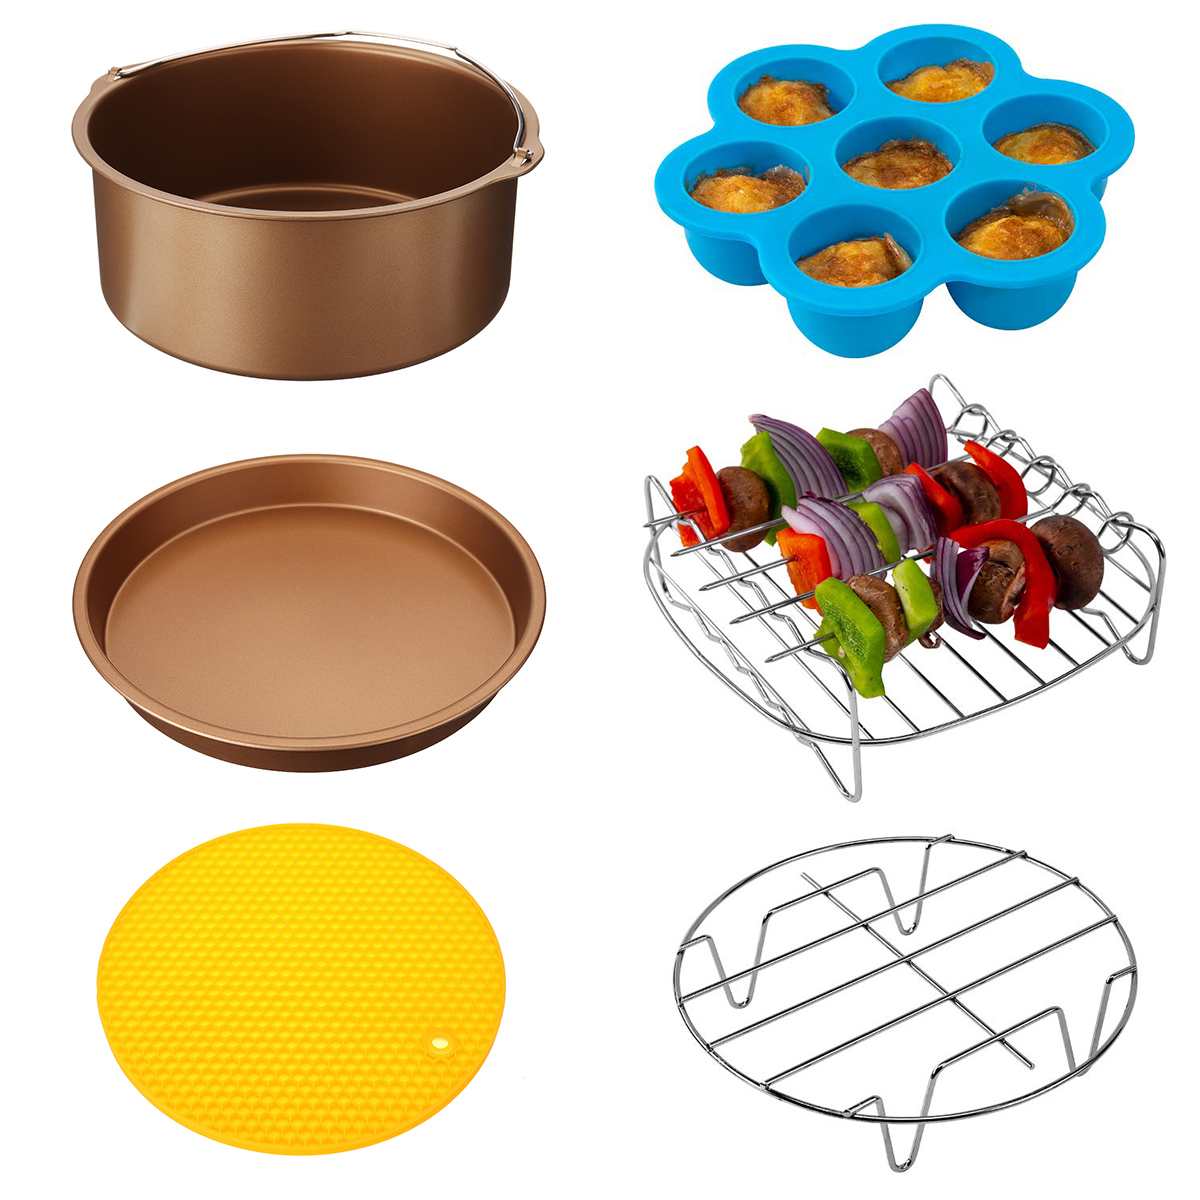 11Pcs Air Fryer Accessories 9 Inch Fit for Air fryer 5.2-6.8QT Baking Basket Pizza Plate Grill Pot Kitchen Cooking Tools